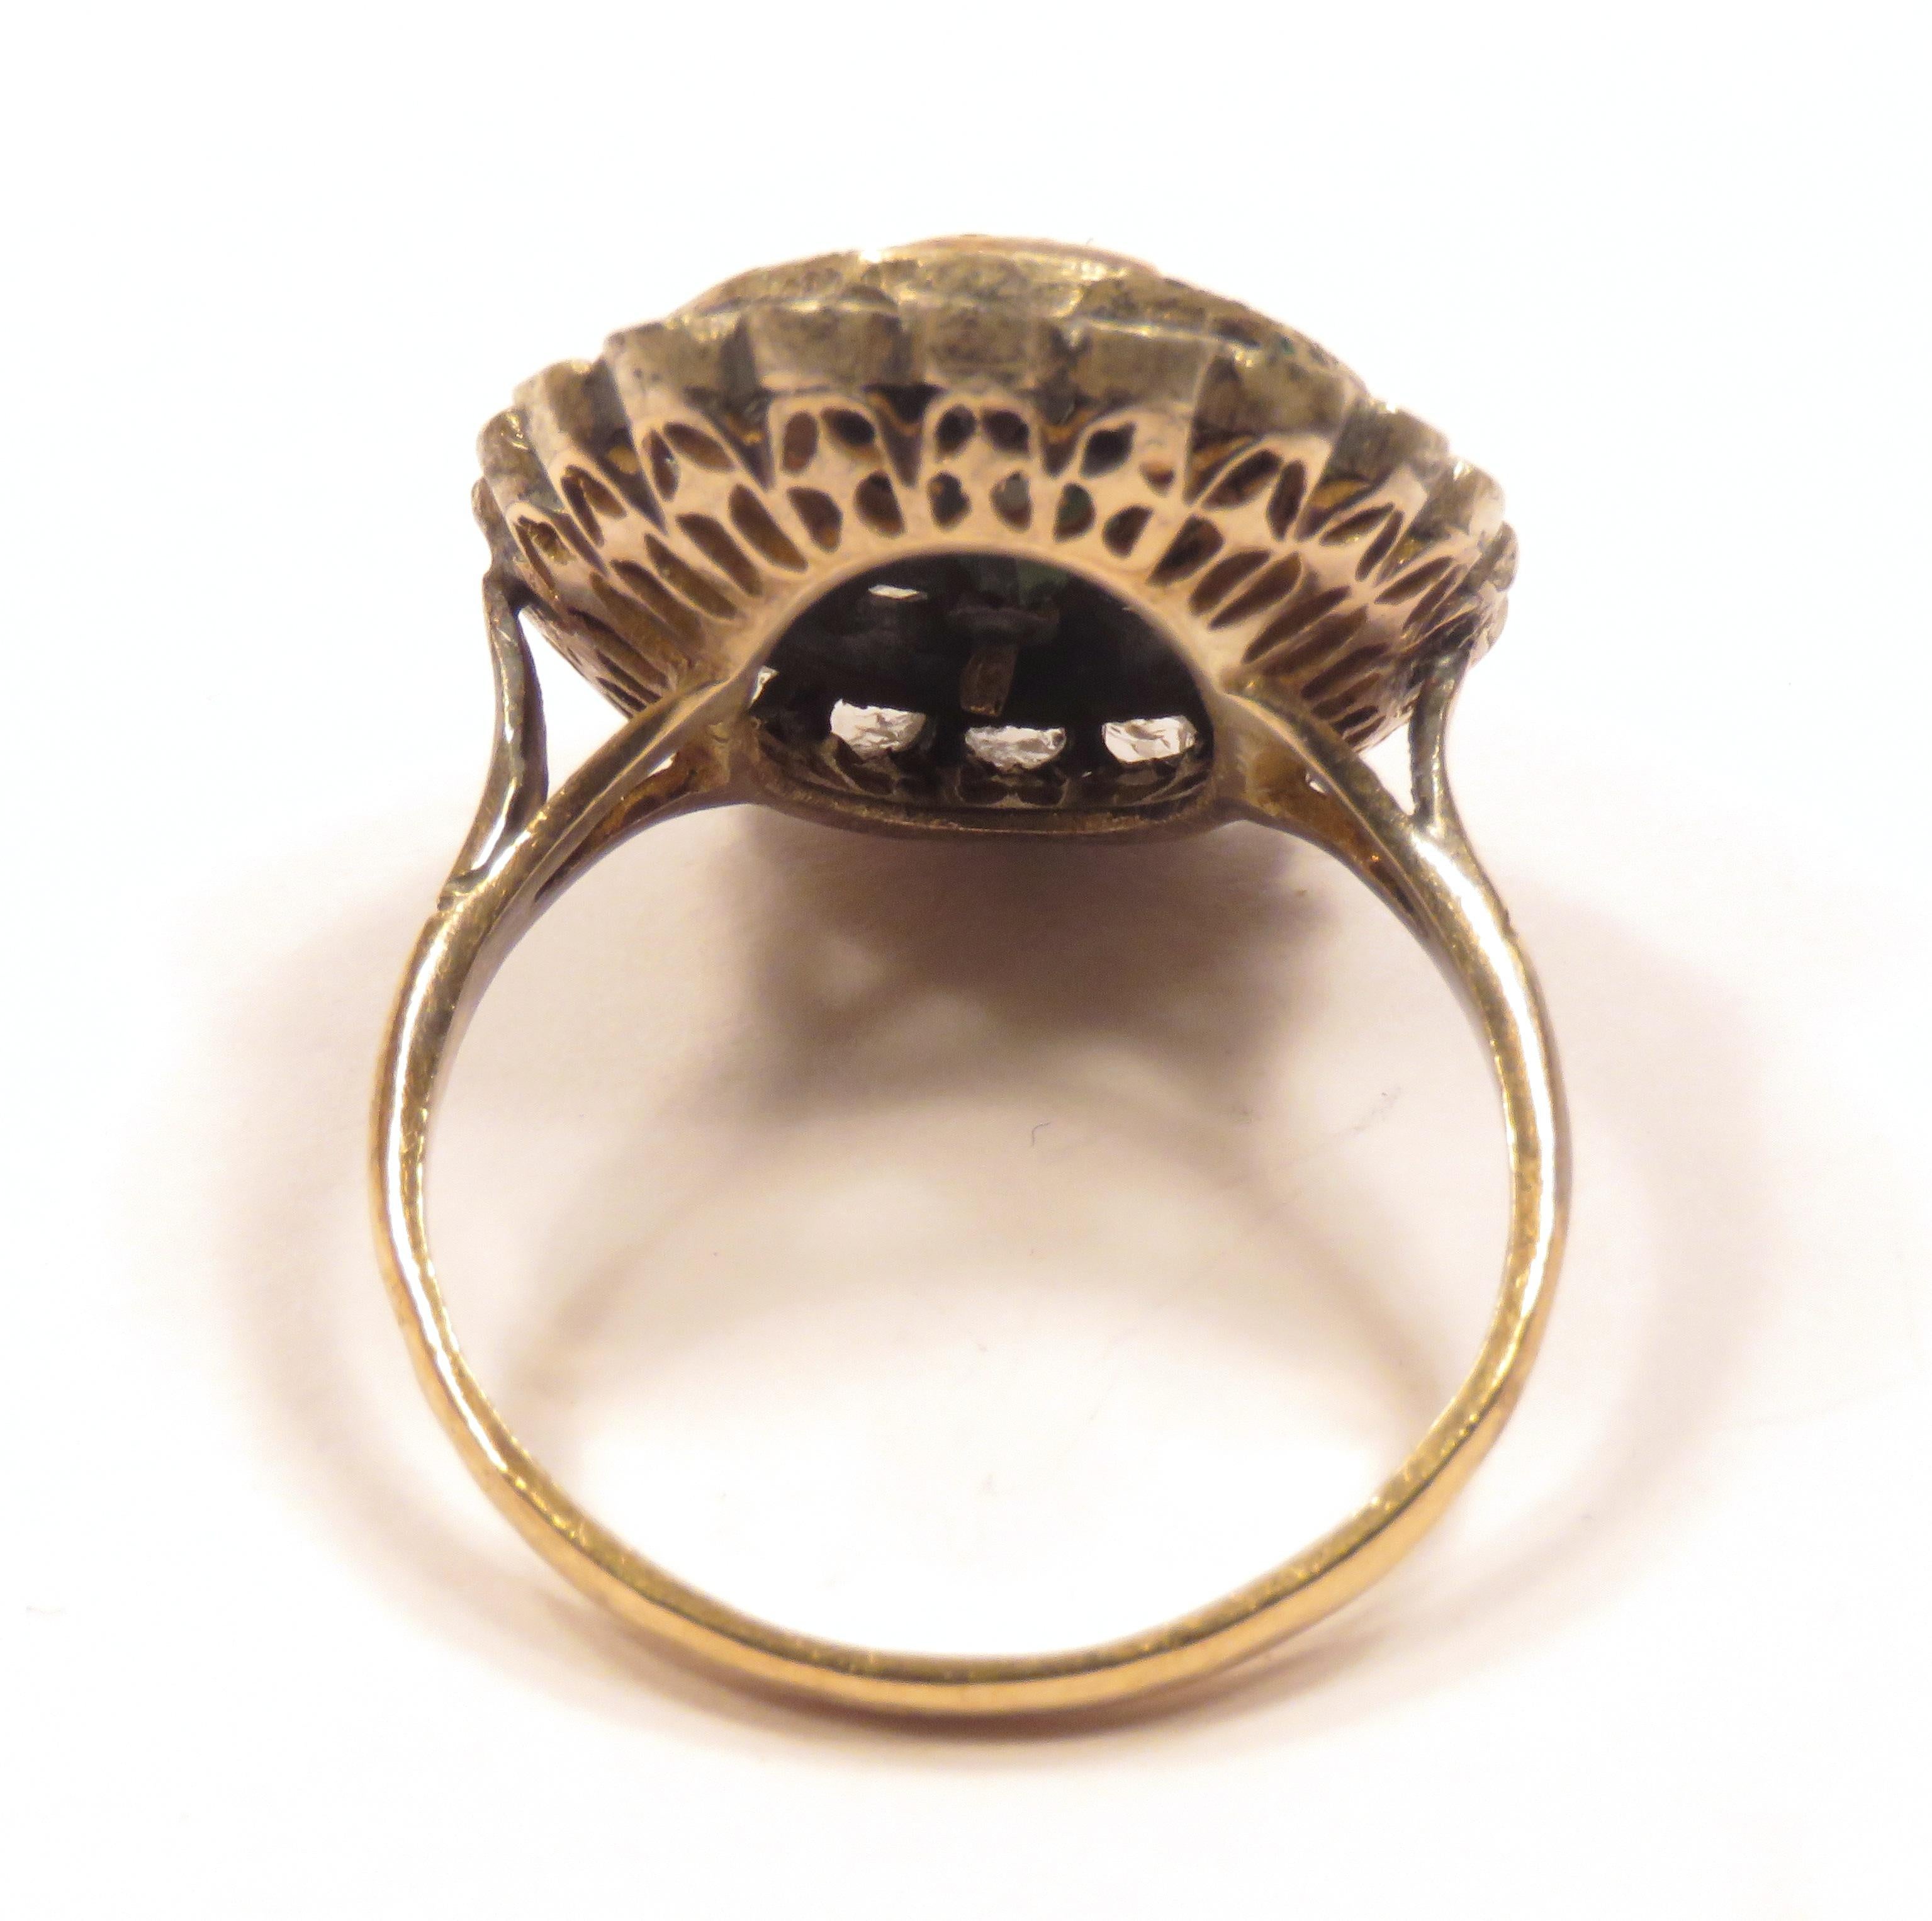 Antique Dome Ring in Silver and Yellow Gold with 40 Diamonds Rose Cut and one Oval Sapphire. This vintage ring dates early 1900s.
The size of the oval sapphire is 9 X 6 millimeter / 0.354331 X 0.23622 inches.
The size of the oval with diamonds is 22